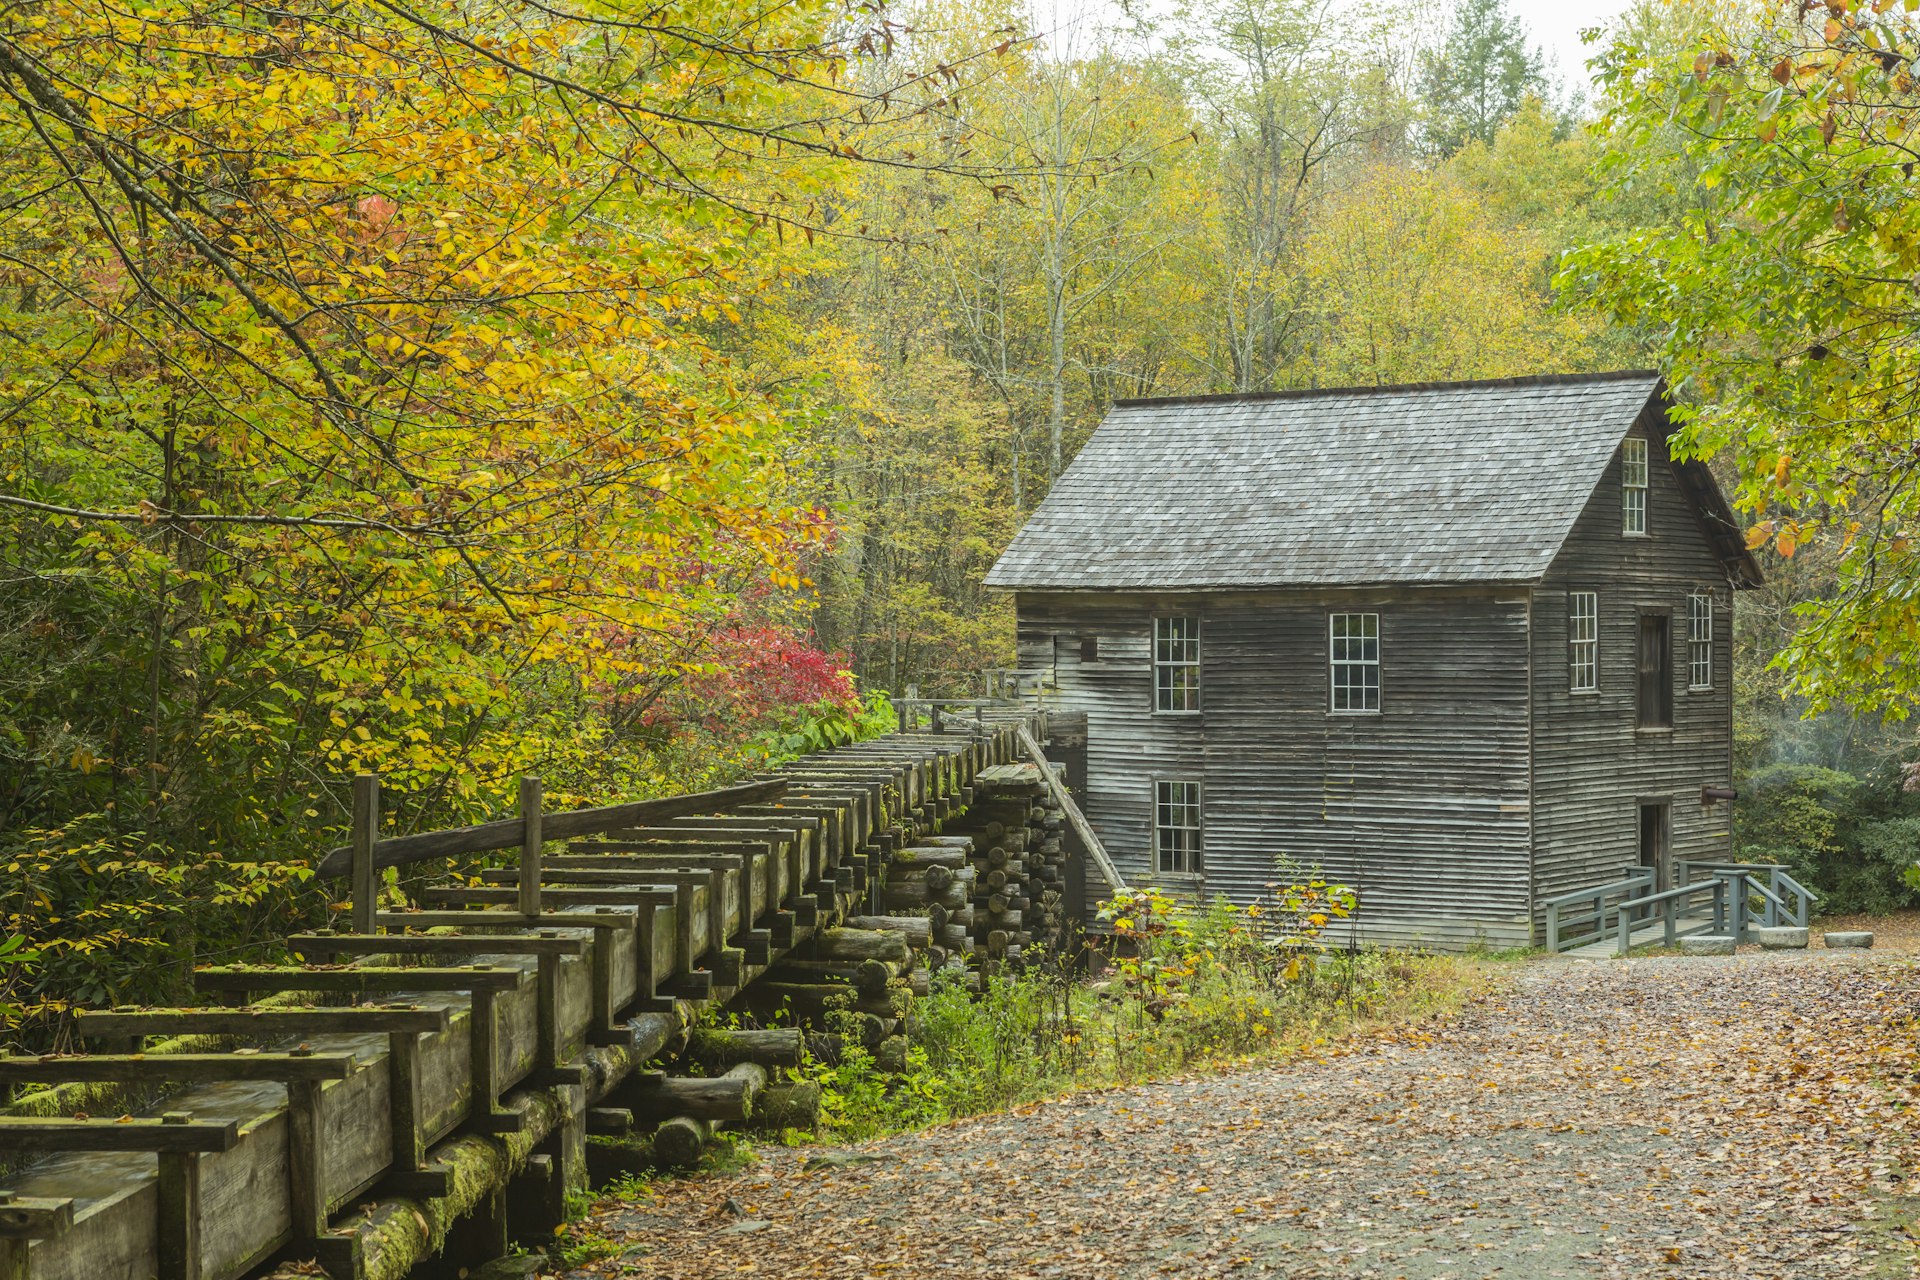 A wooden heritage building, used as a mill, is surrounded by green forest. A man-made wooden stream leads to the mill.